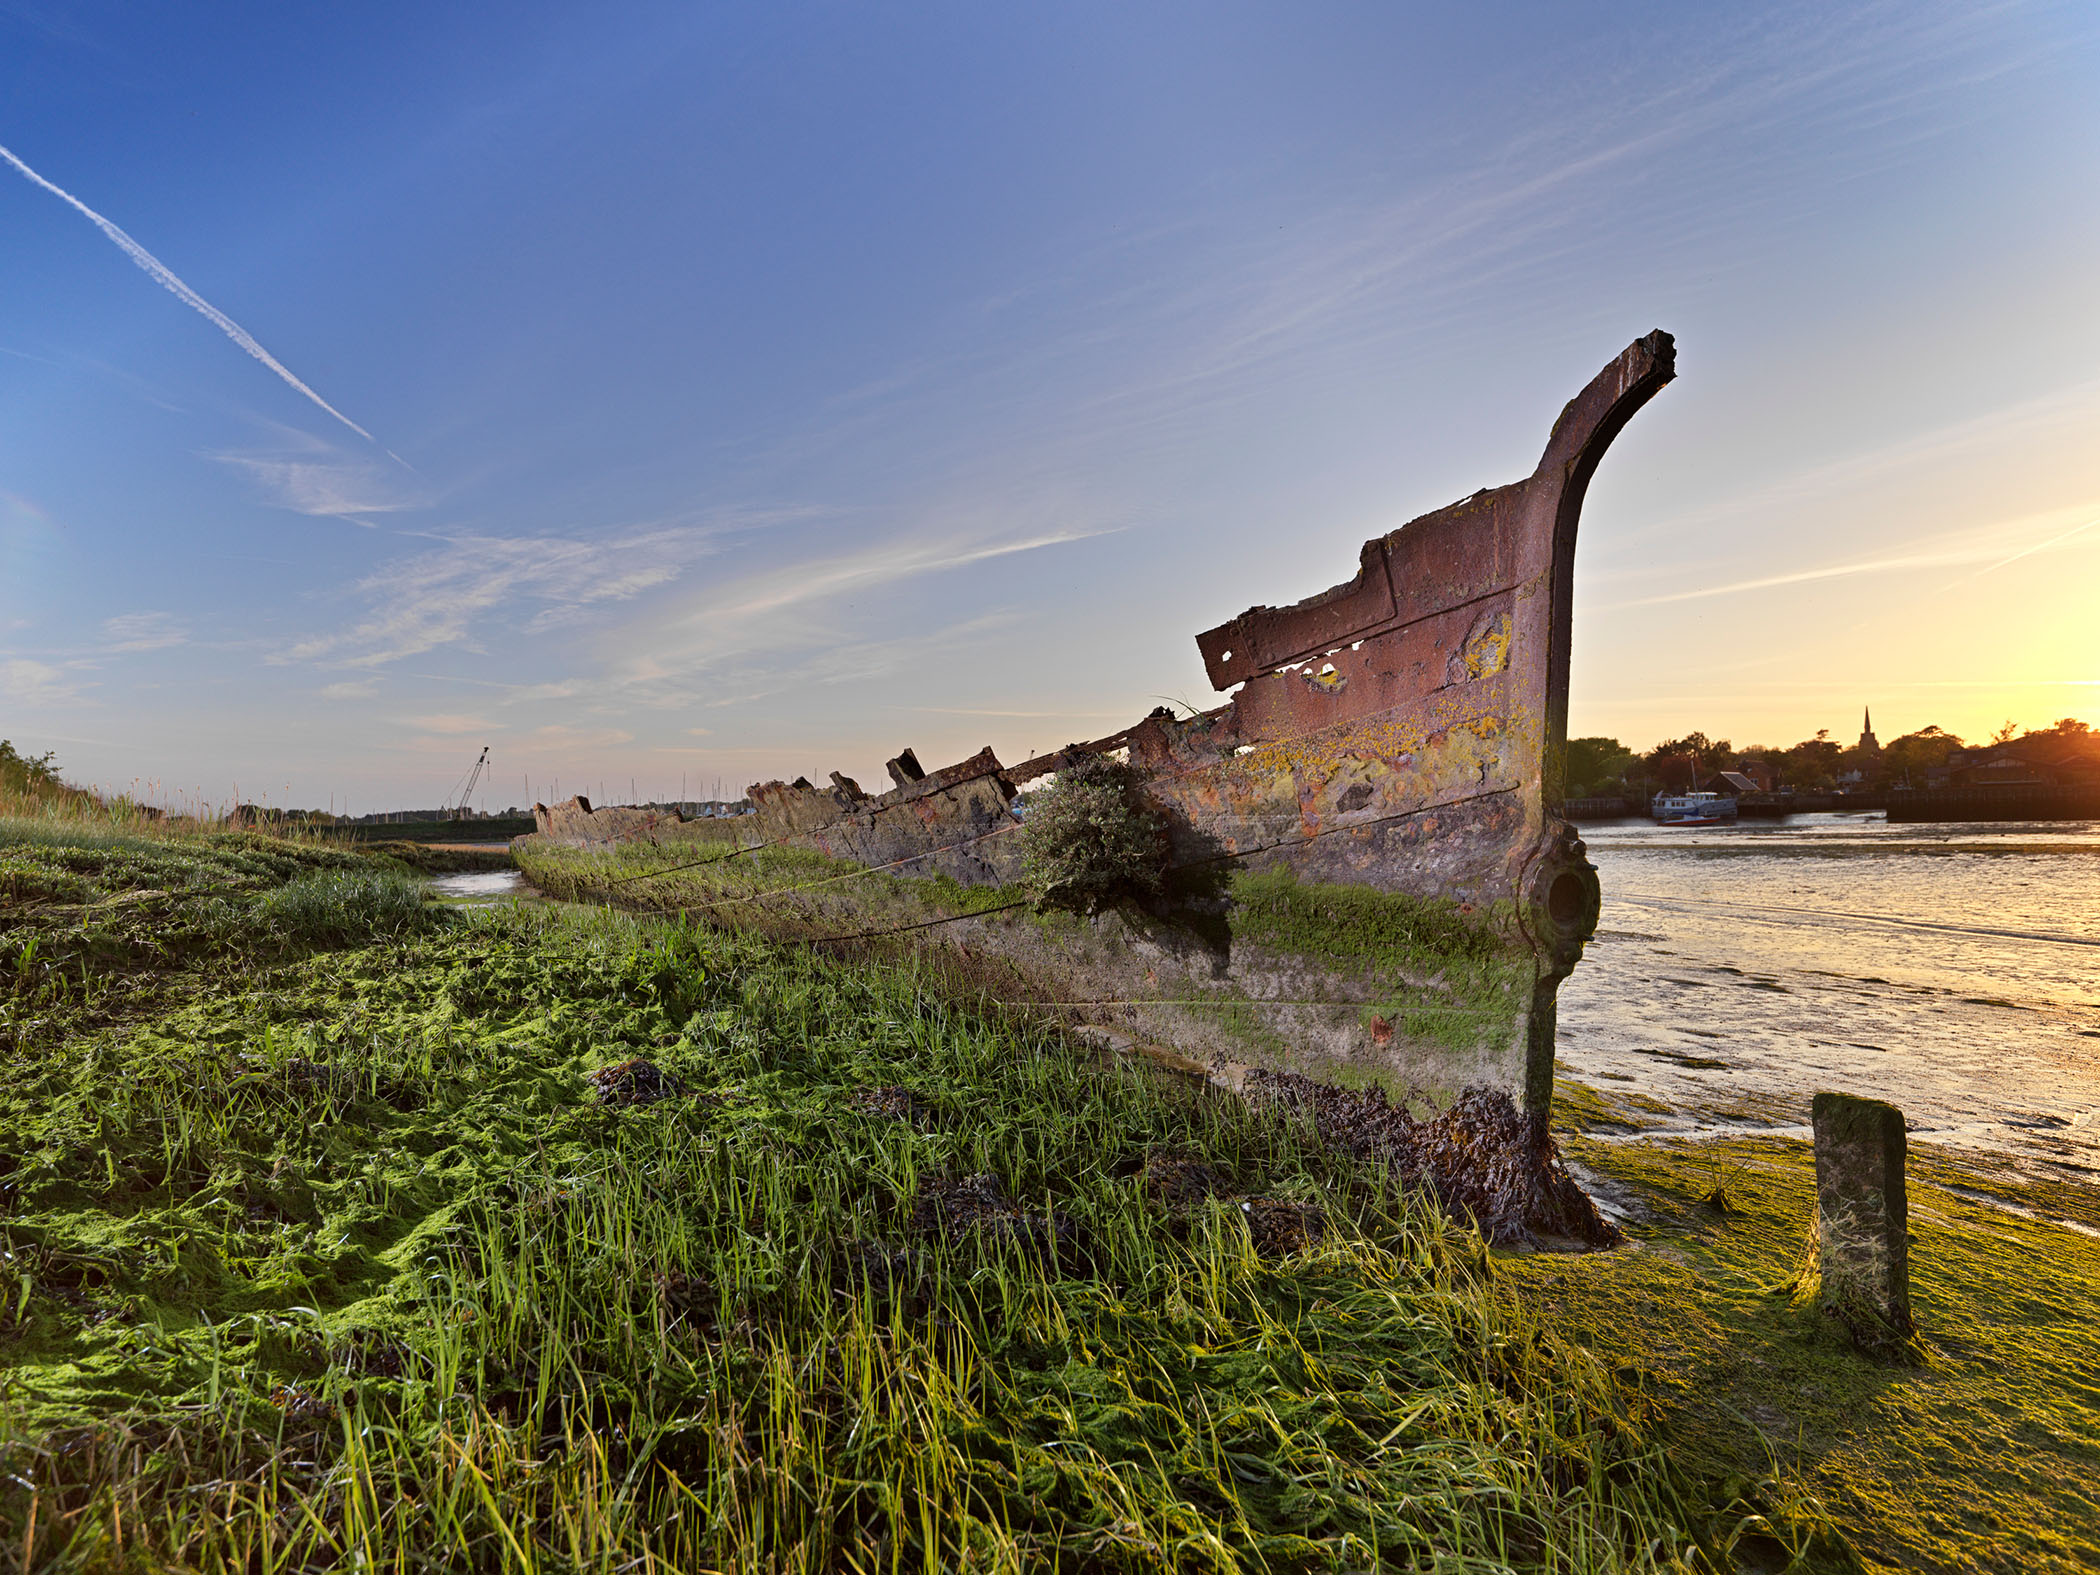 The remains of a ship on a grassy river bank.